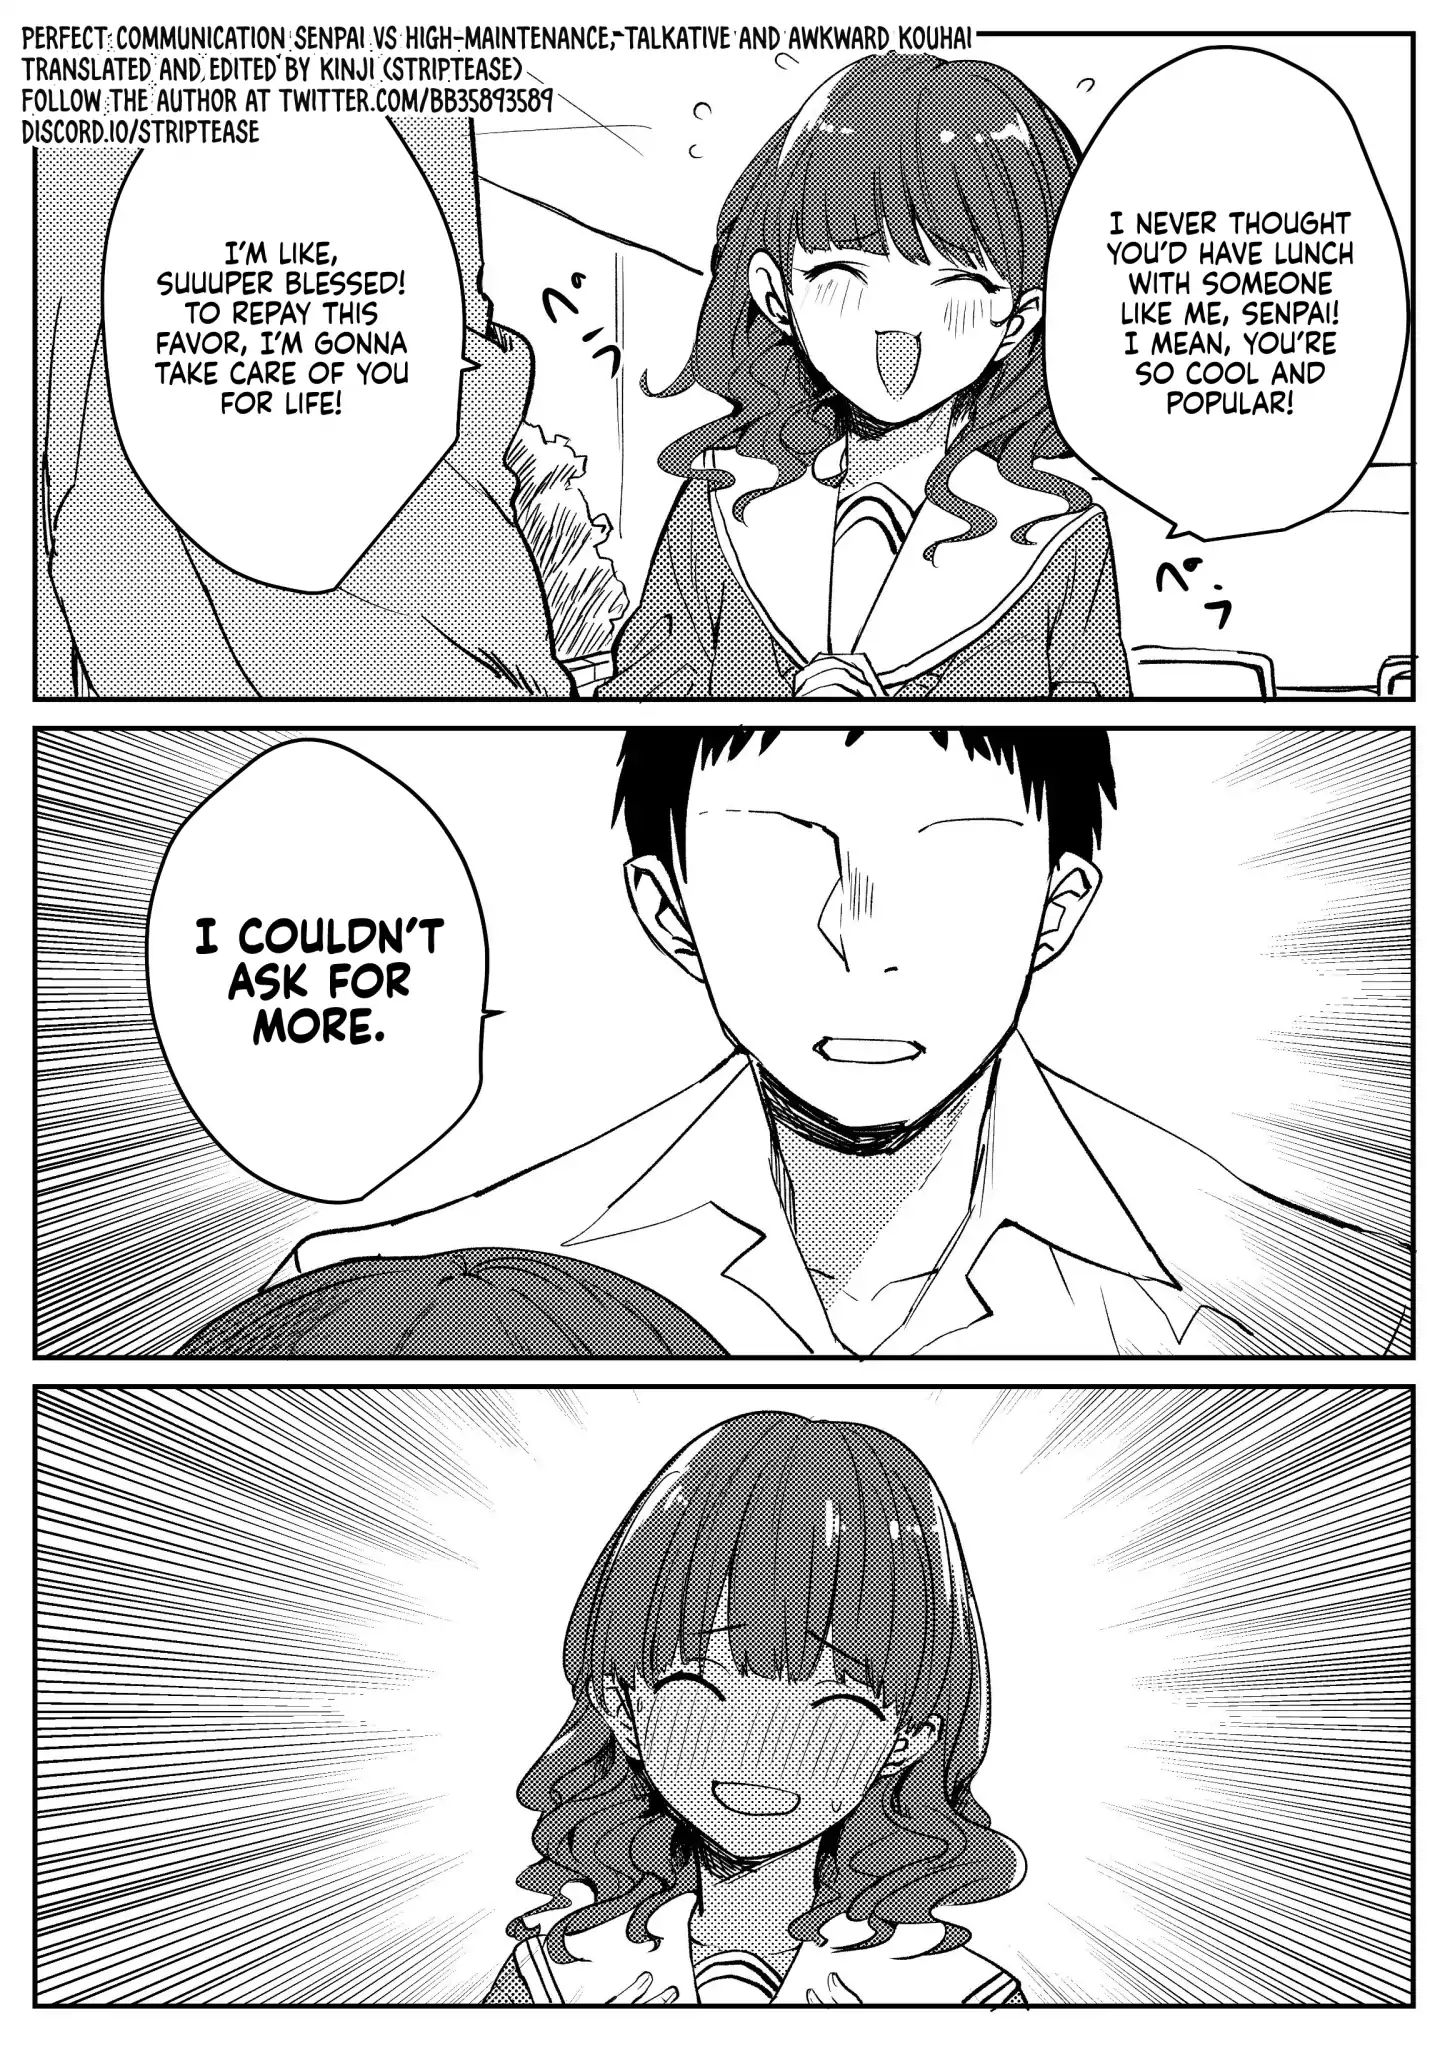 Flag Capture In The First Move Chapter 7: Perfect Communication Senpai Vs. High-Maintenance, Talkative And Awkward Kouhai - Picture 1